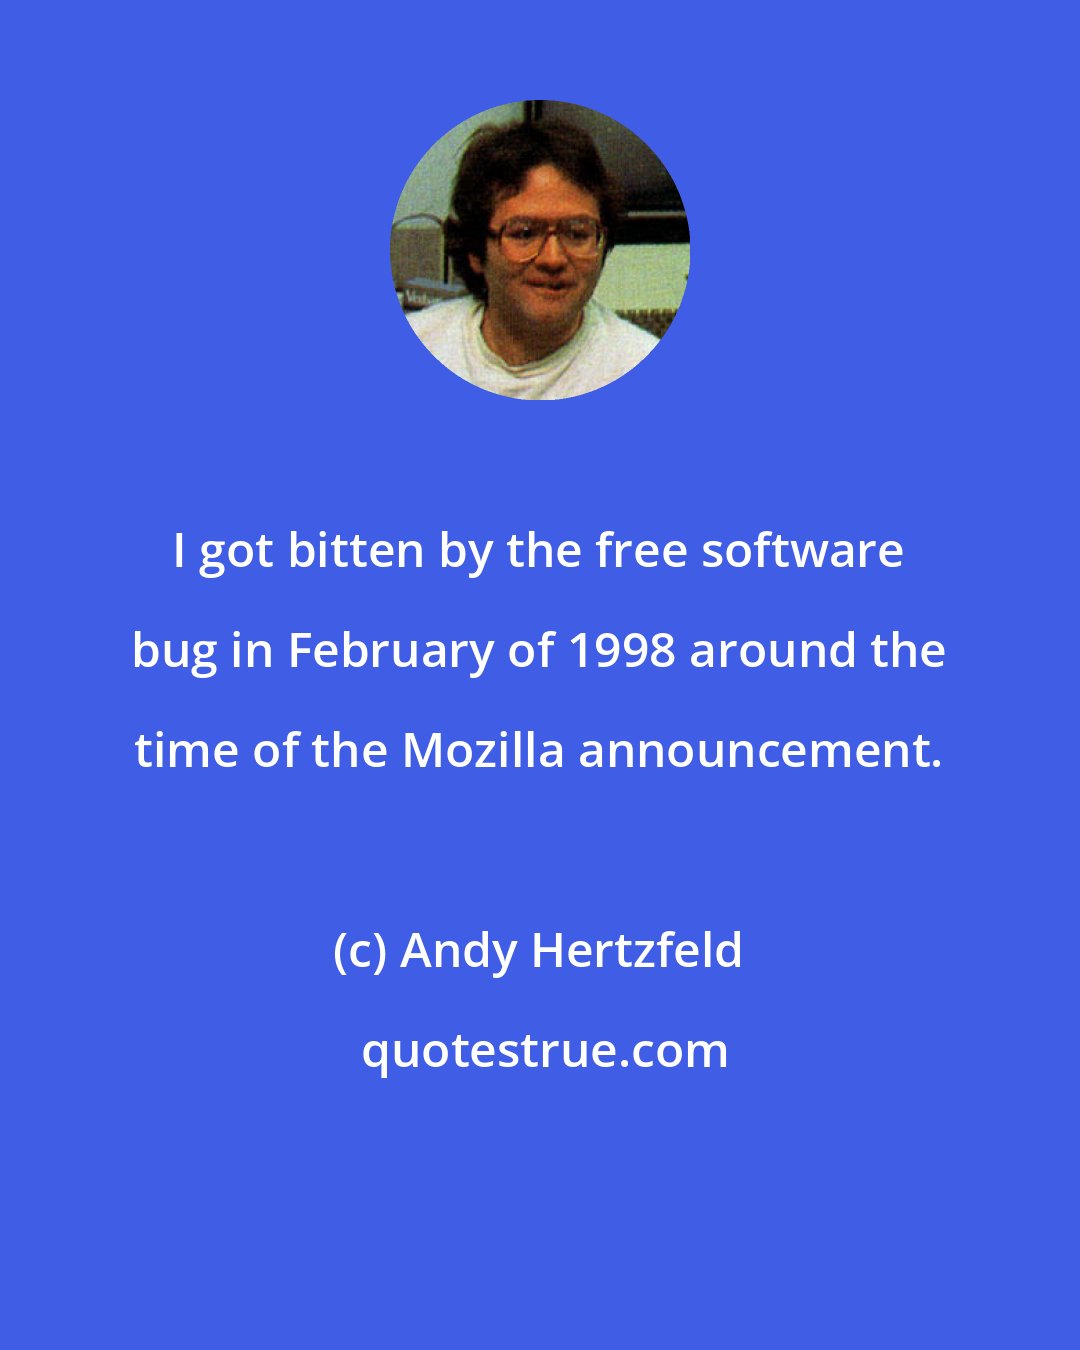 Andy Hertzfeld: I got bitten by the free software bug in February of 1998 around the time of the Mozilla announcement.